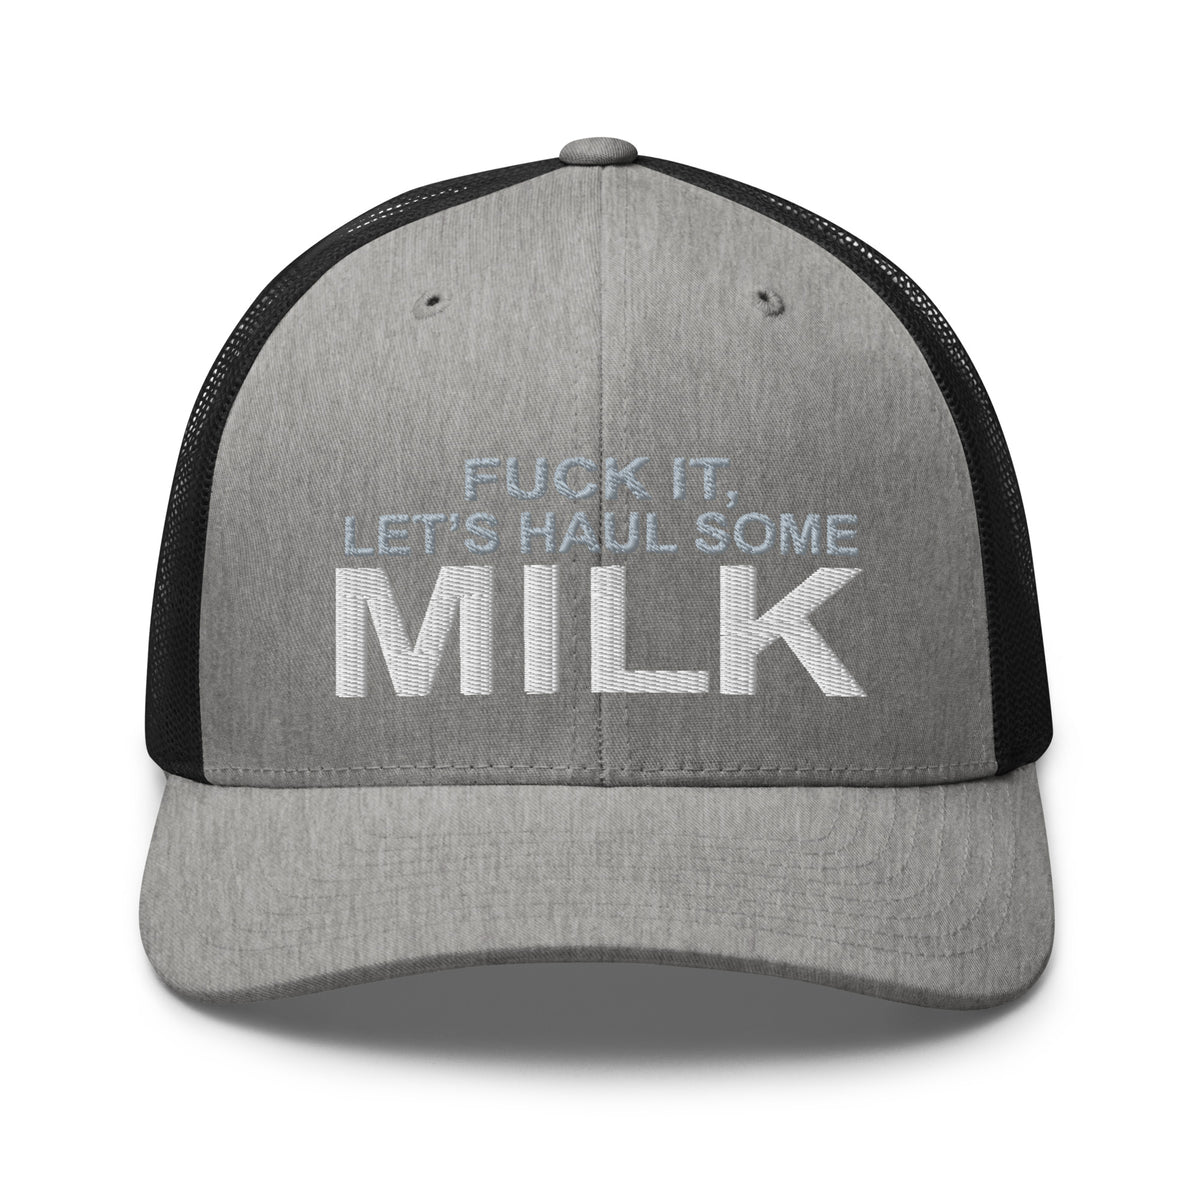 Fuck It, Let's Haul Some Milk - Snapback Hat - Free Shipping